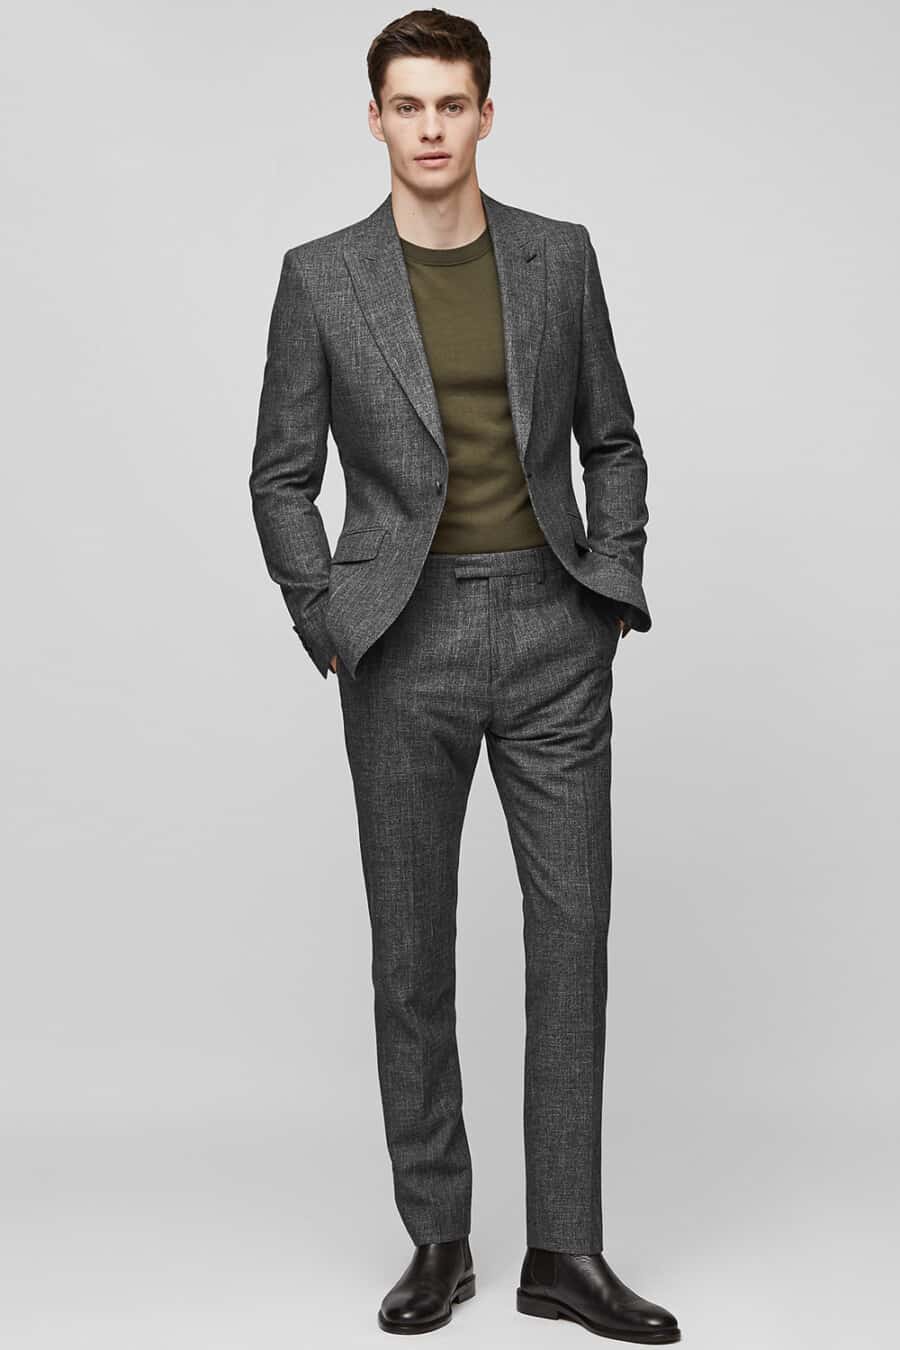 Men's textural charcoal suit, green T-shirt and black leather Chelsea boots outfit